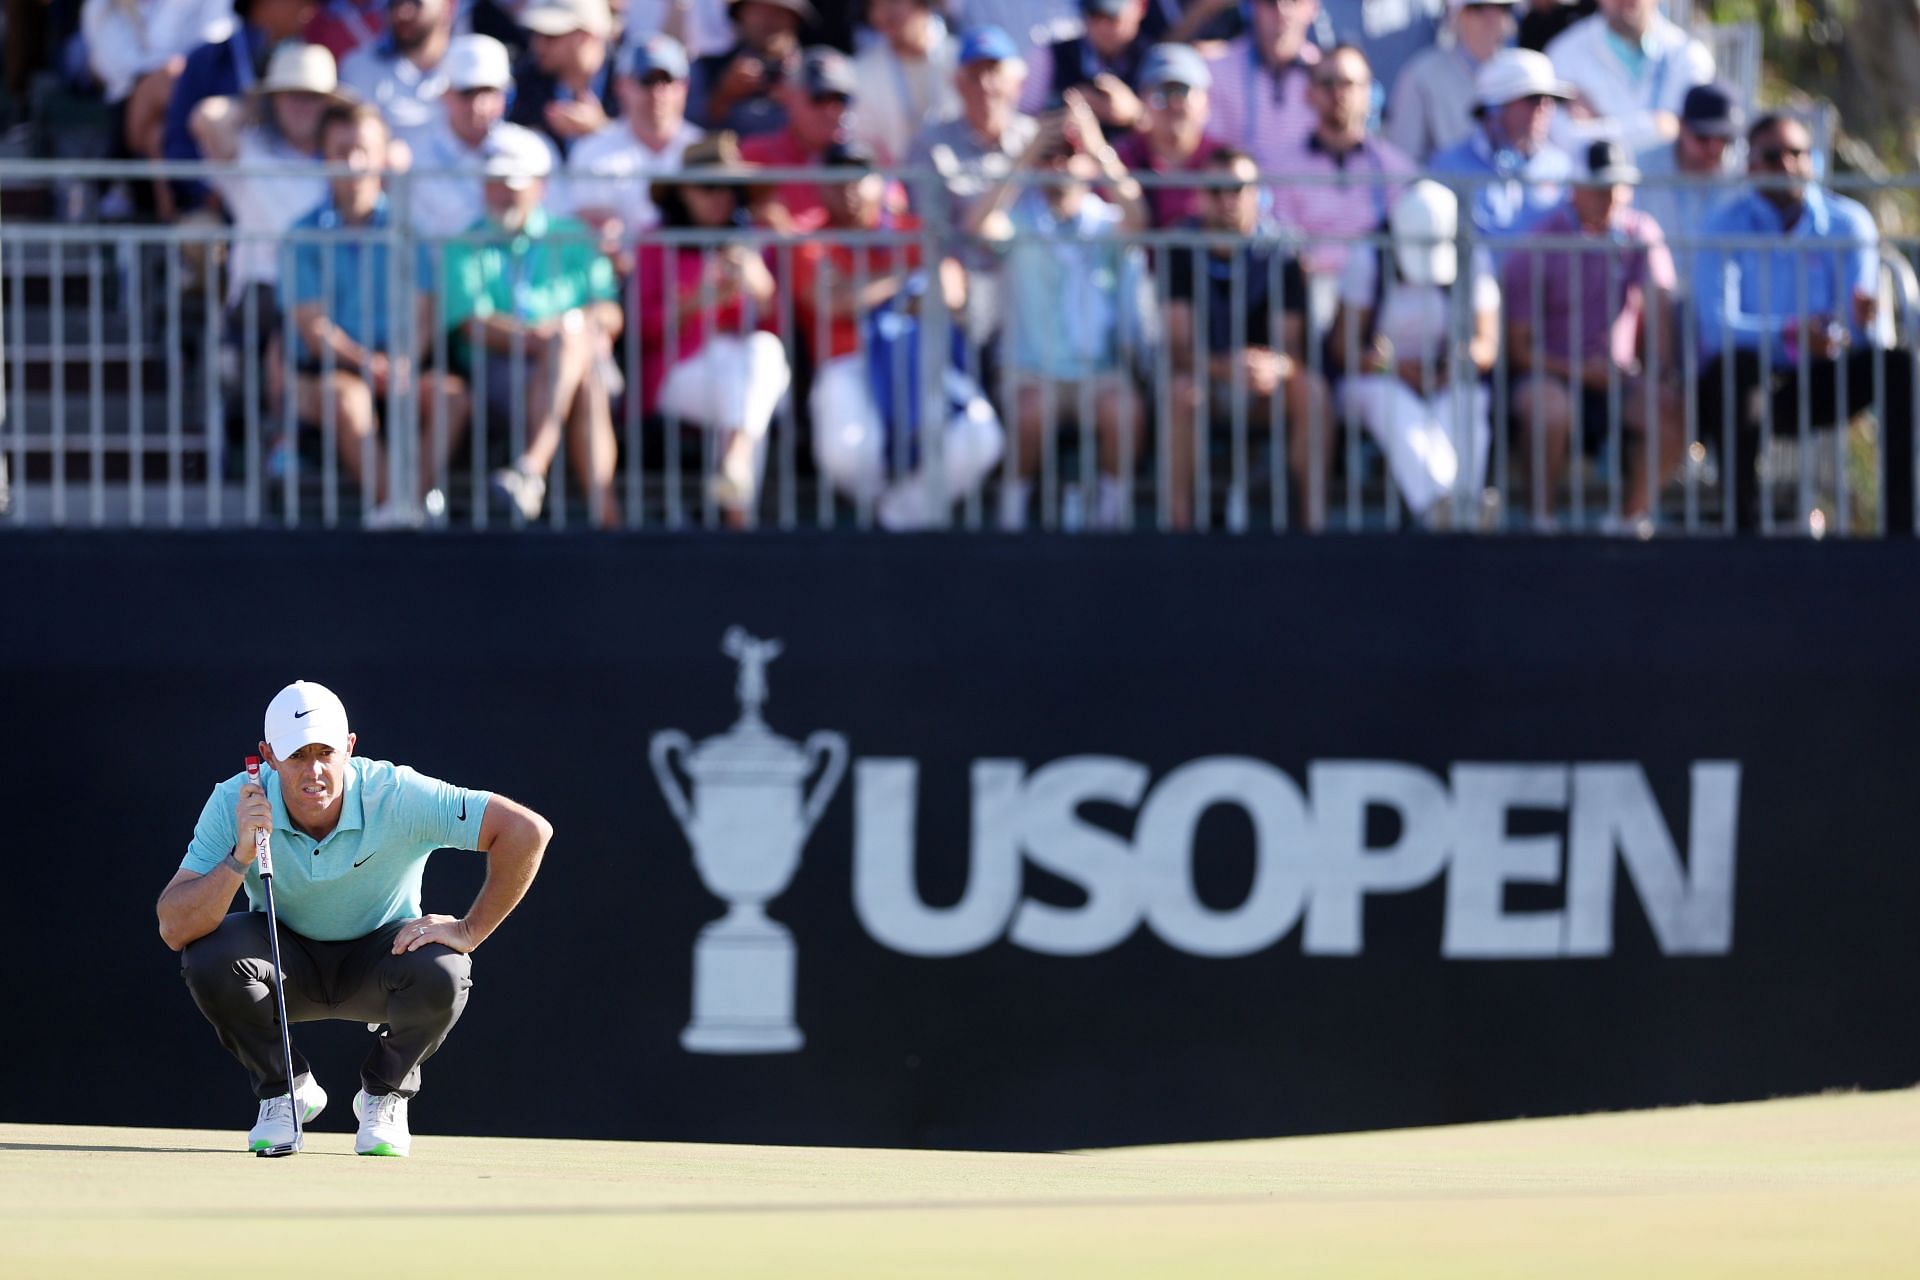 McIlroy was the runner-up at the 123rd U.S. Open Championship